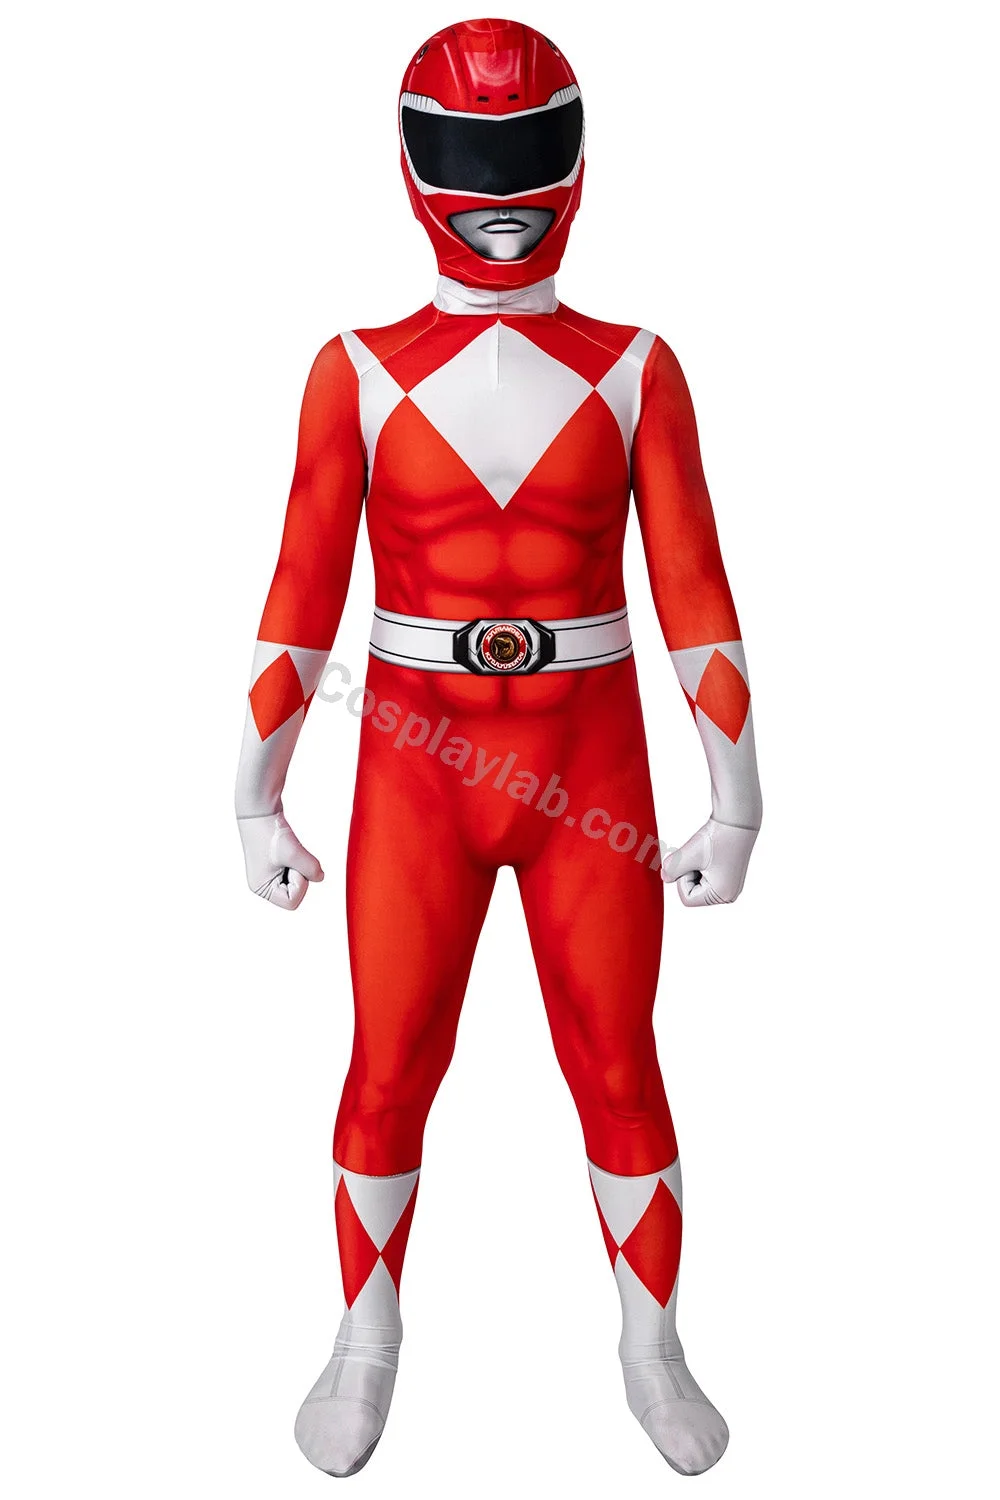 Kids Red Ranger Cosplay Suit 3D Spandex Costume Christmas Gifts for Children Jumpsuit By CosplayLab